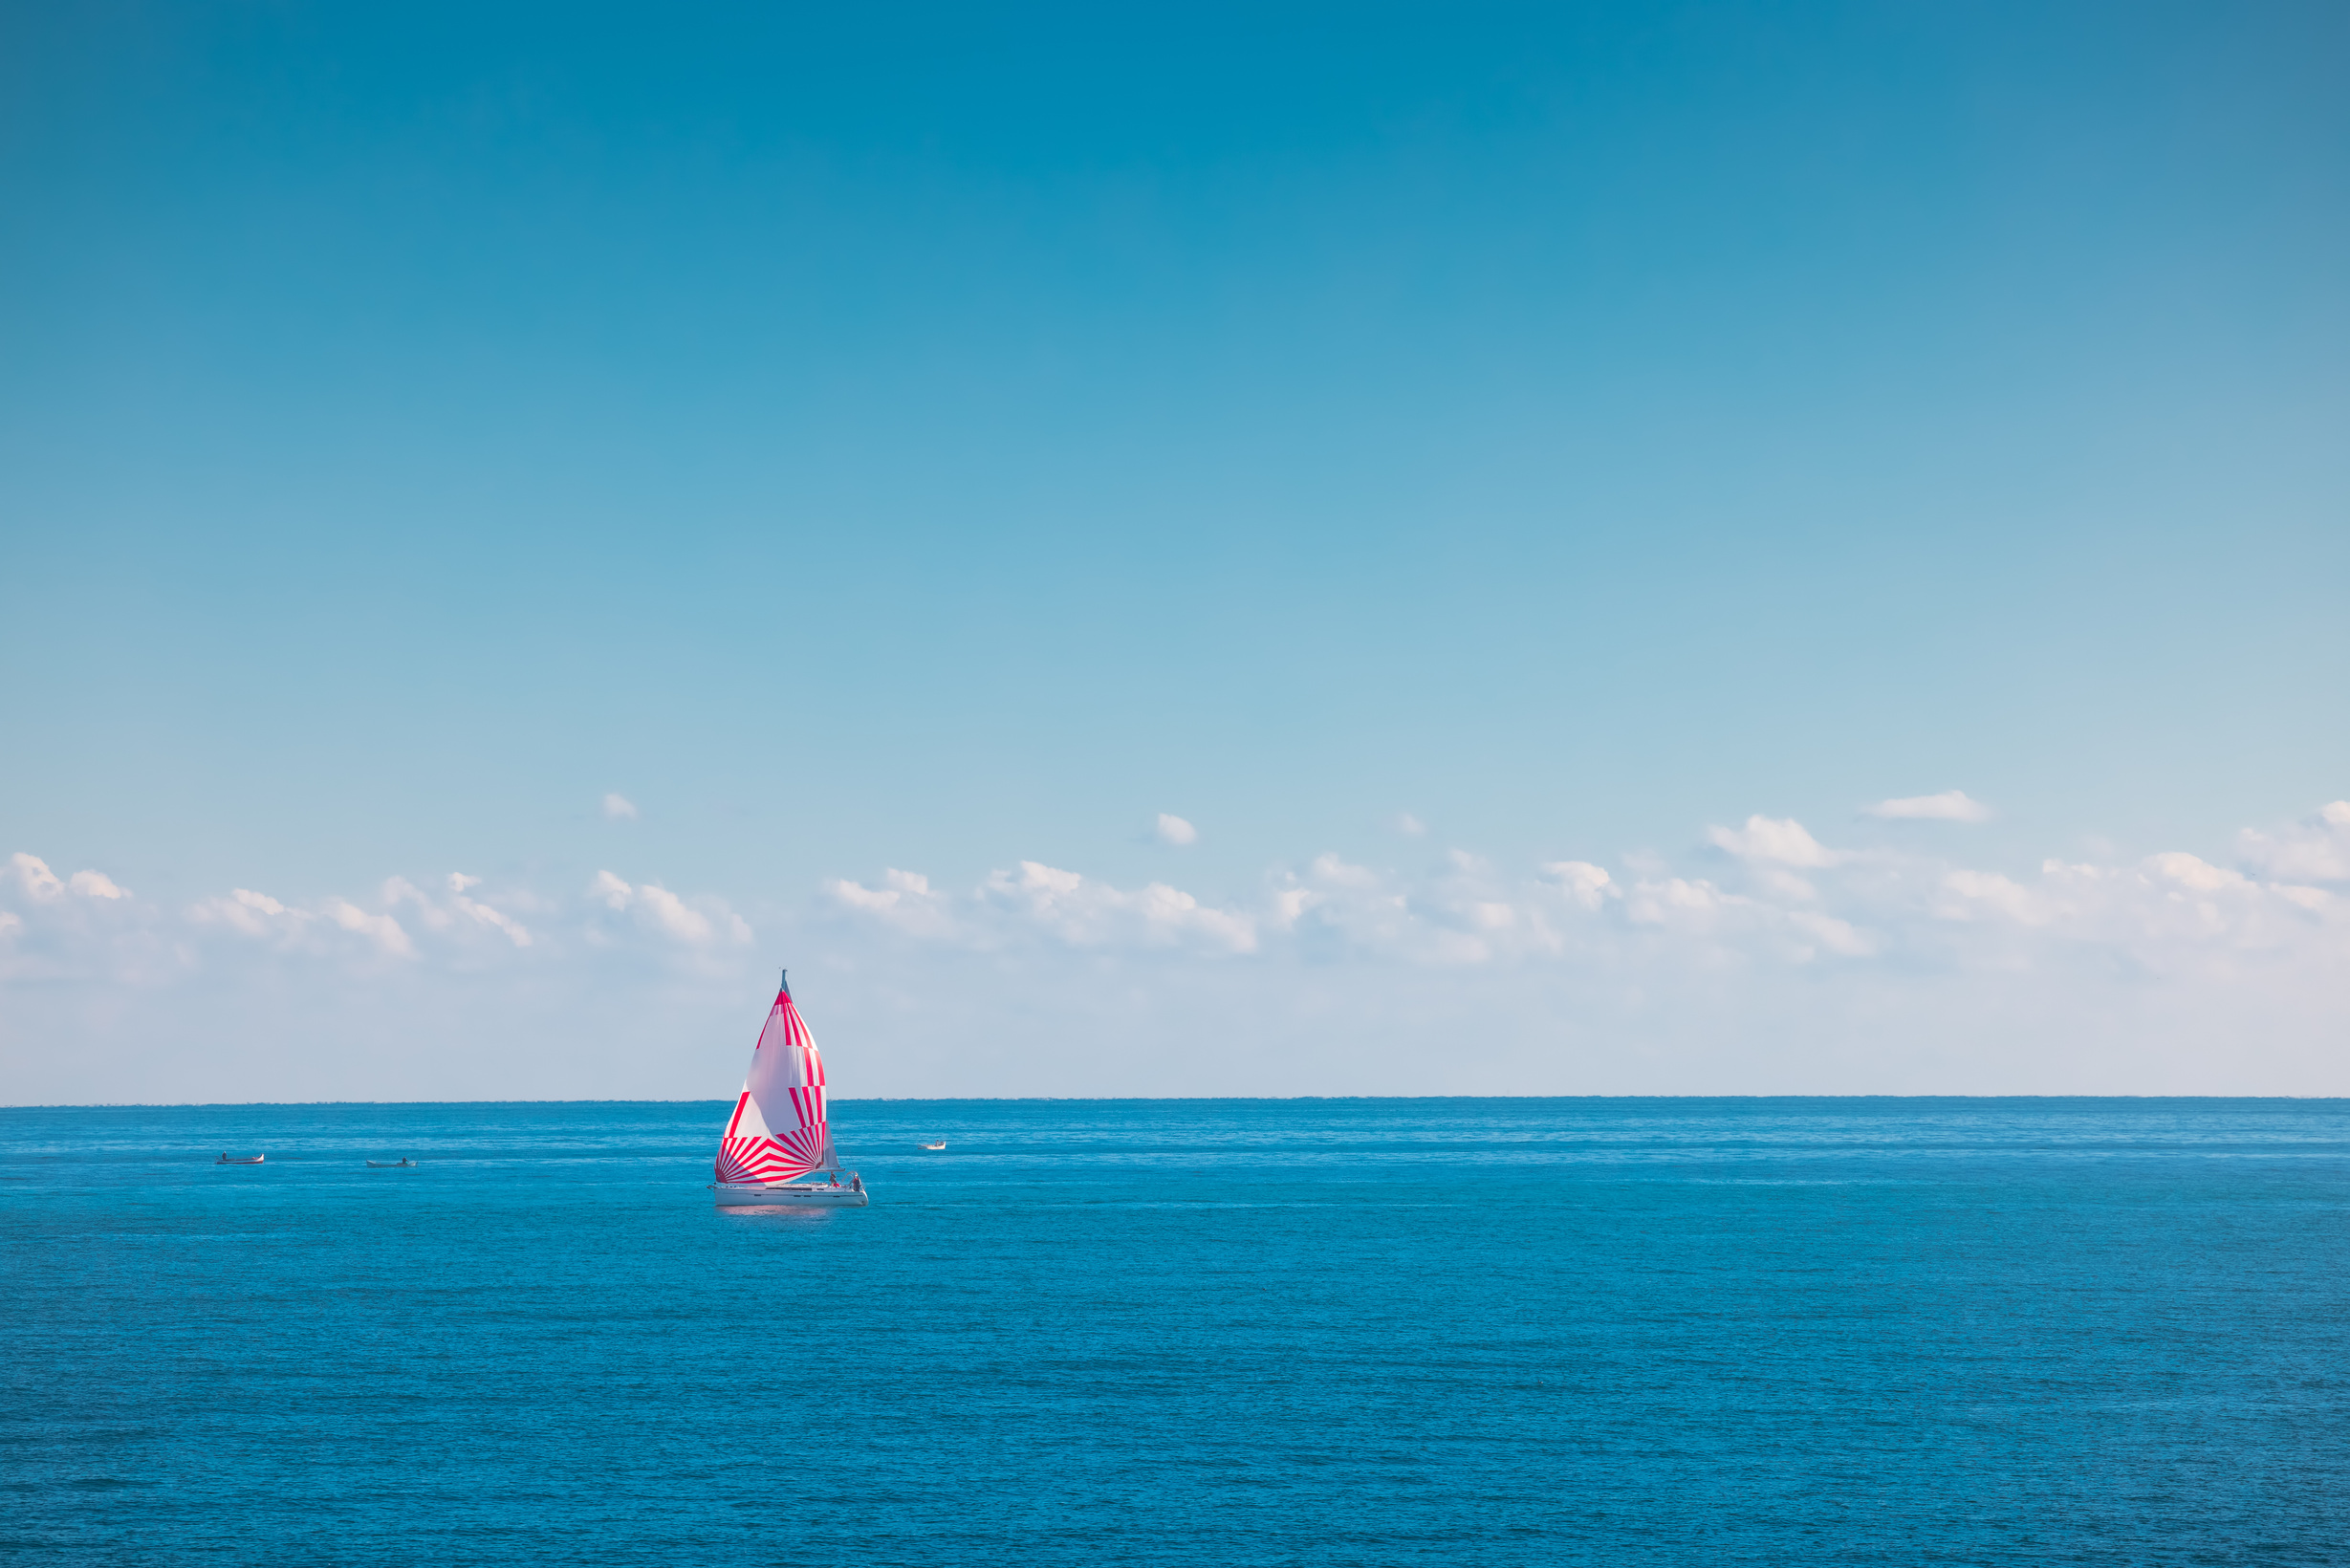 Sea and sailing wind boat. Sailboat over blue waves and sunny sky